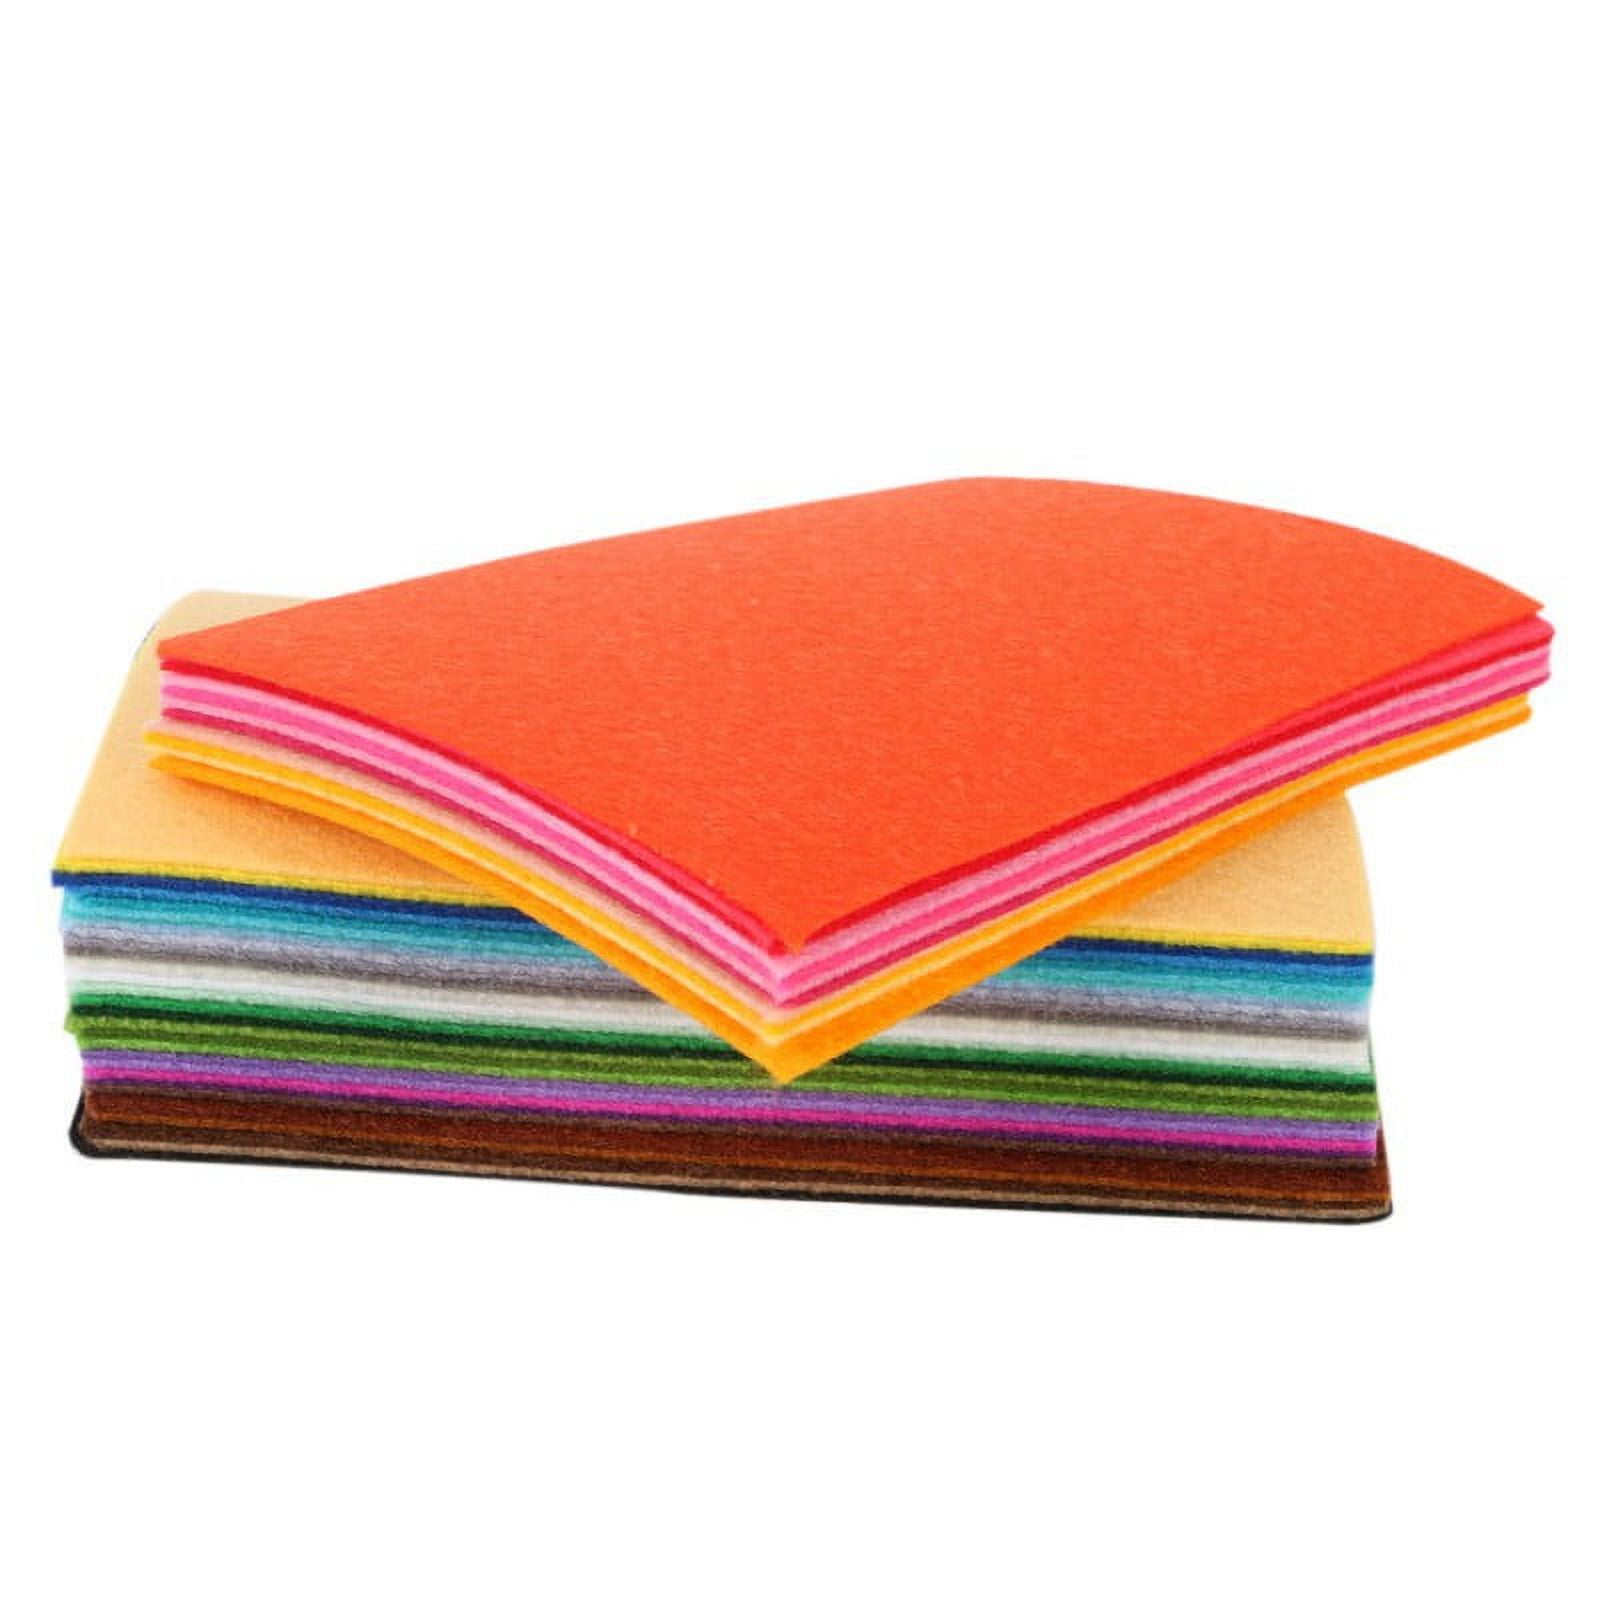 Bastex 50 Pieces Colored Craft Felt Fabric Sheets. 6 x 6 Inches with 1mm Thickness. Many Assorted Colors Pack for DIY Crafts.